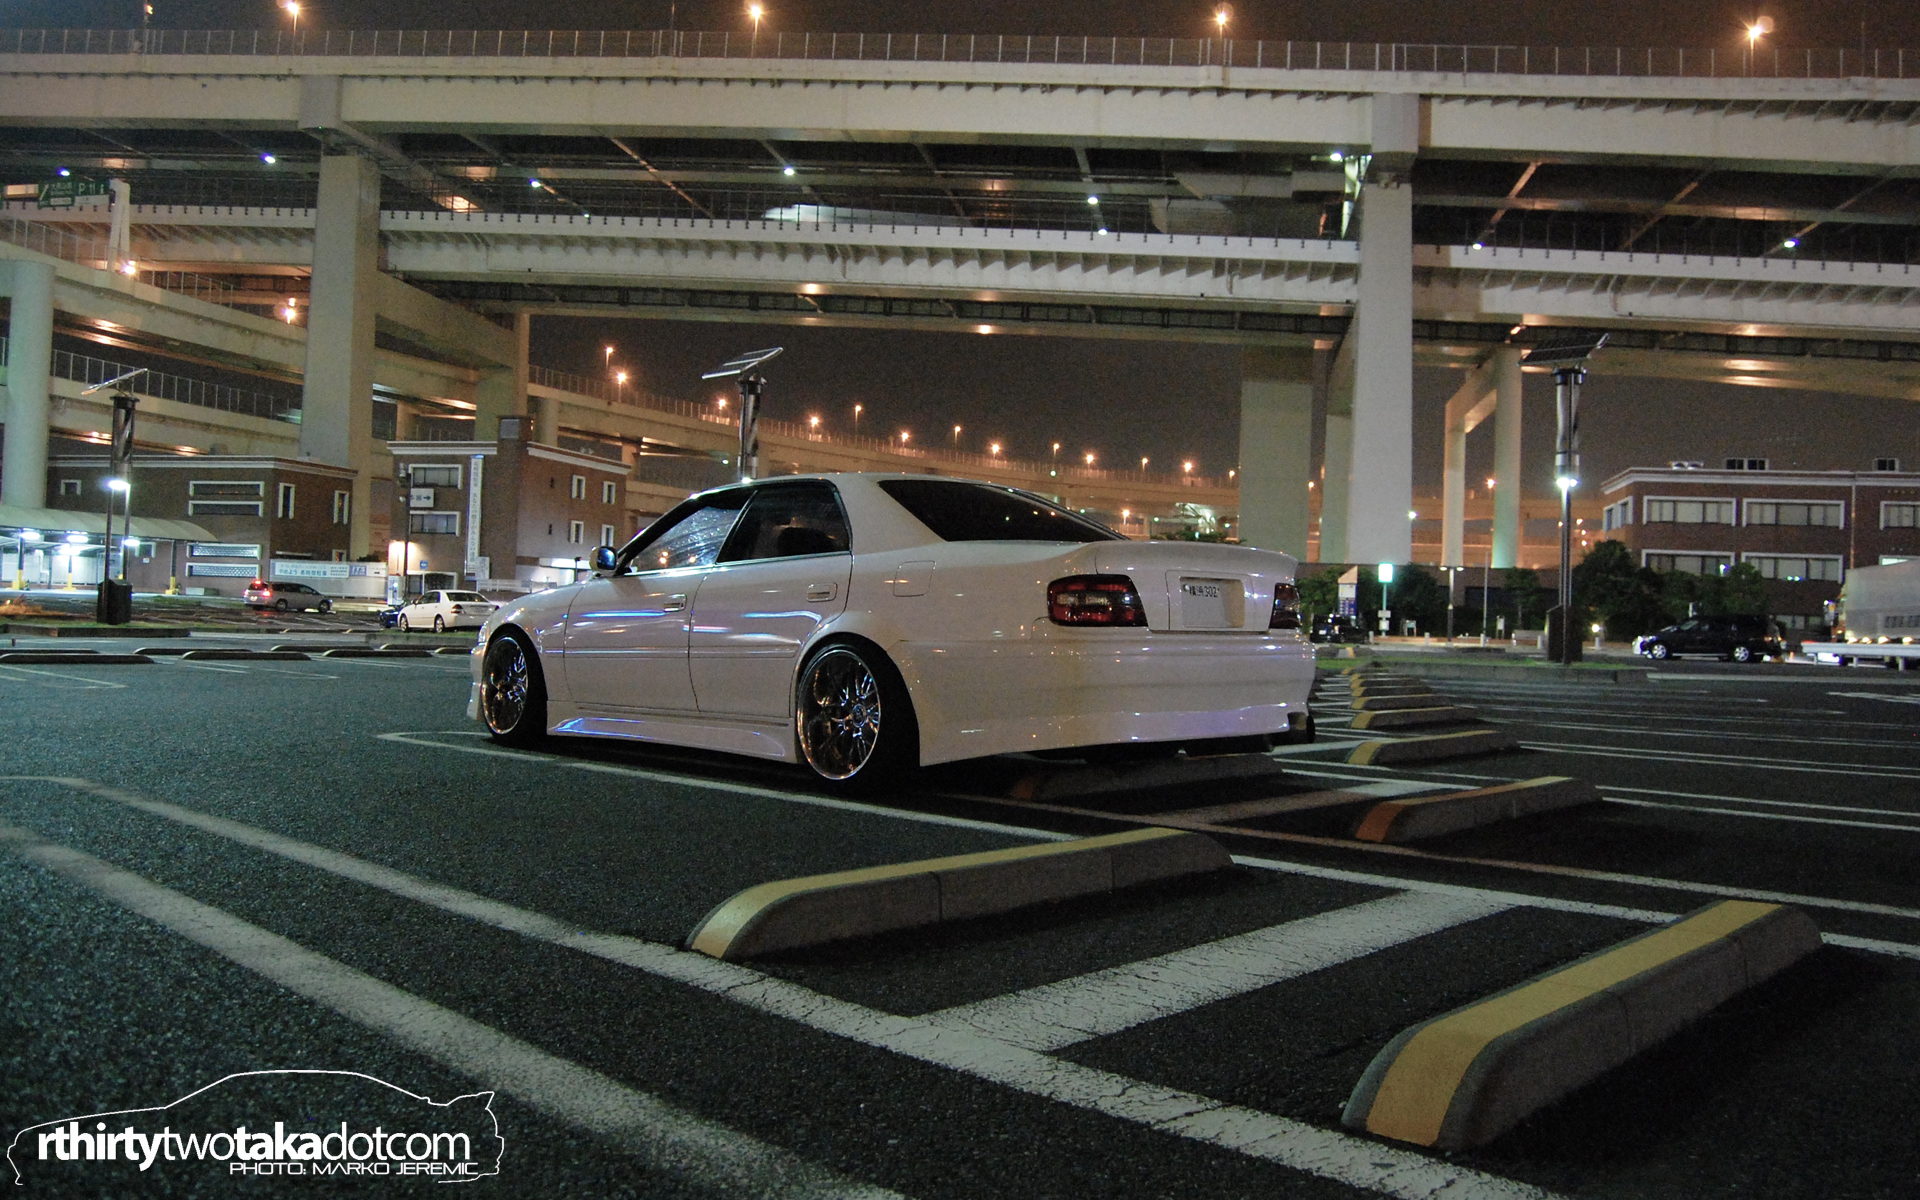 Cleanest Toyota Chaser JZX100